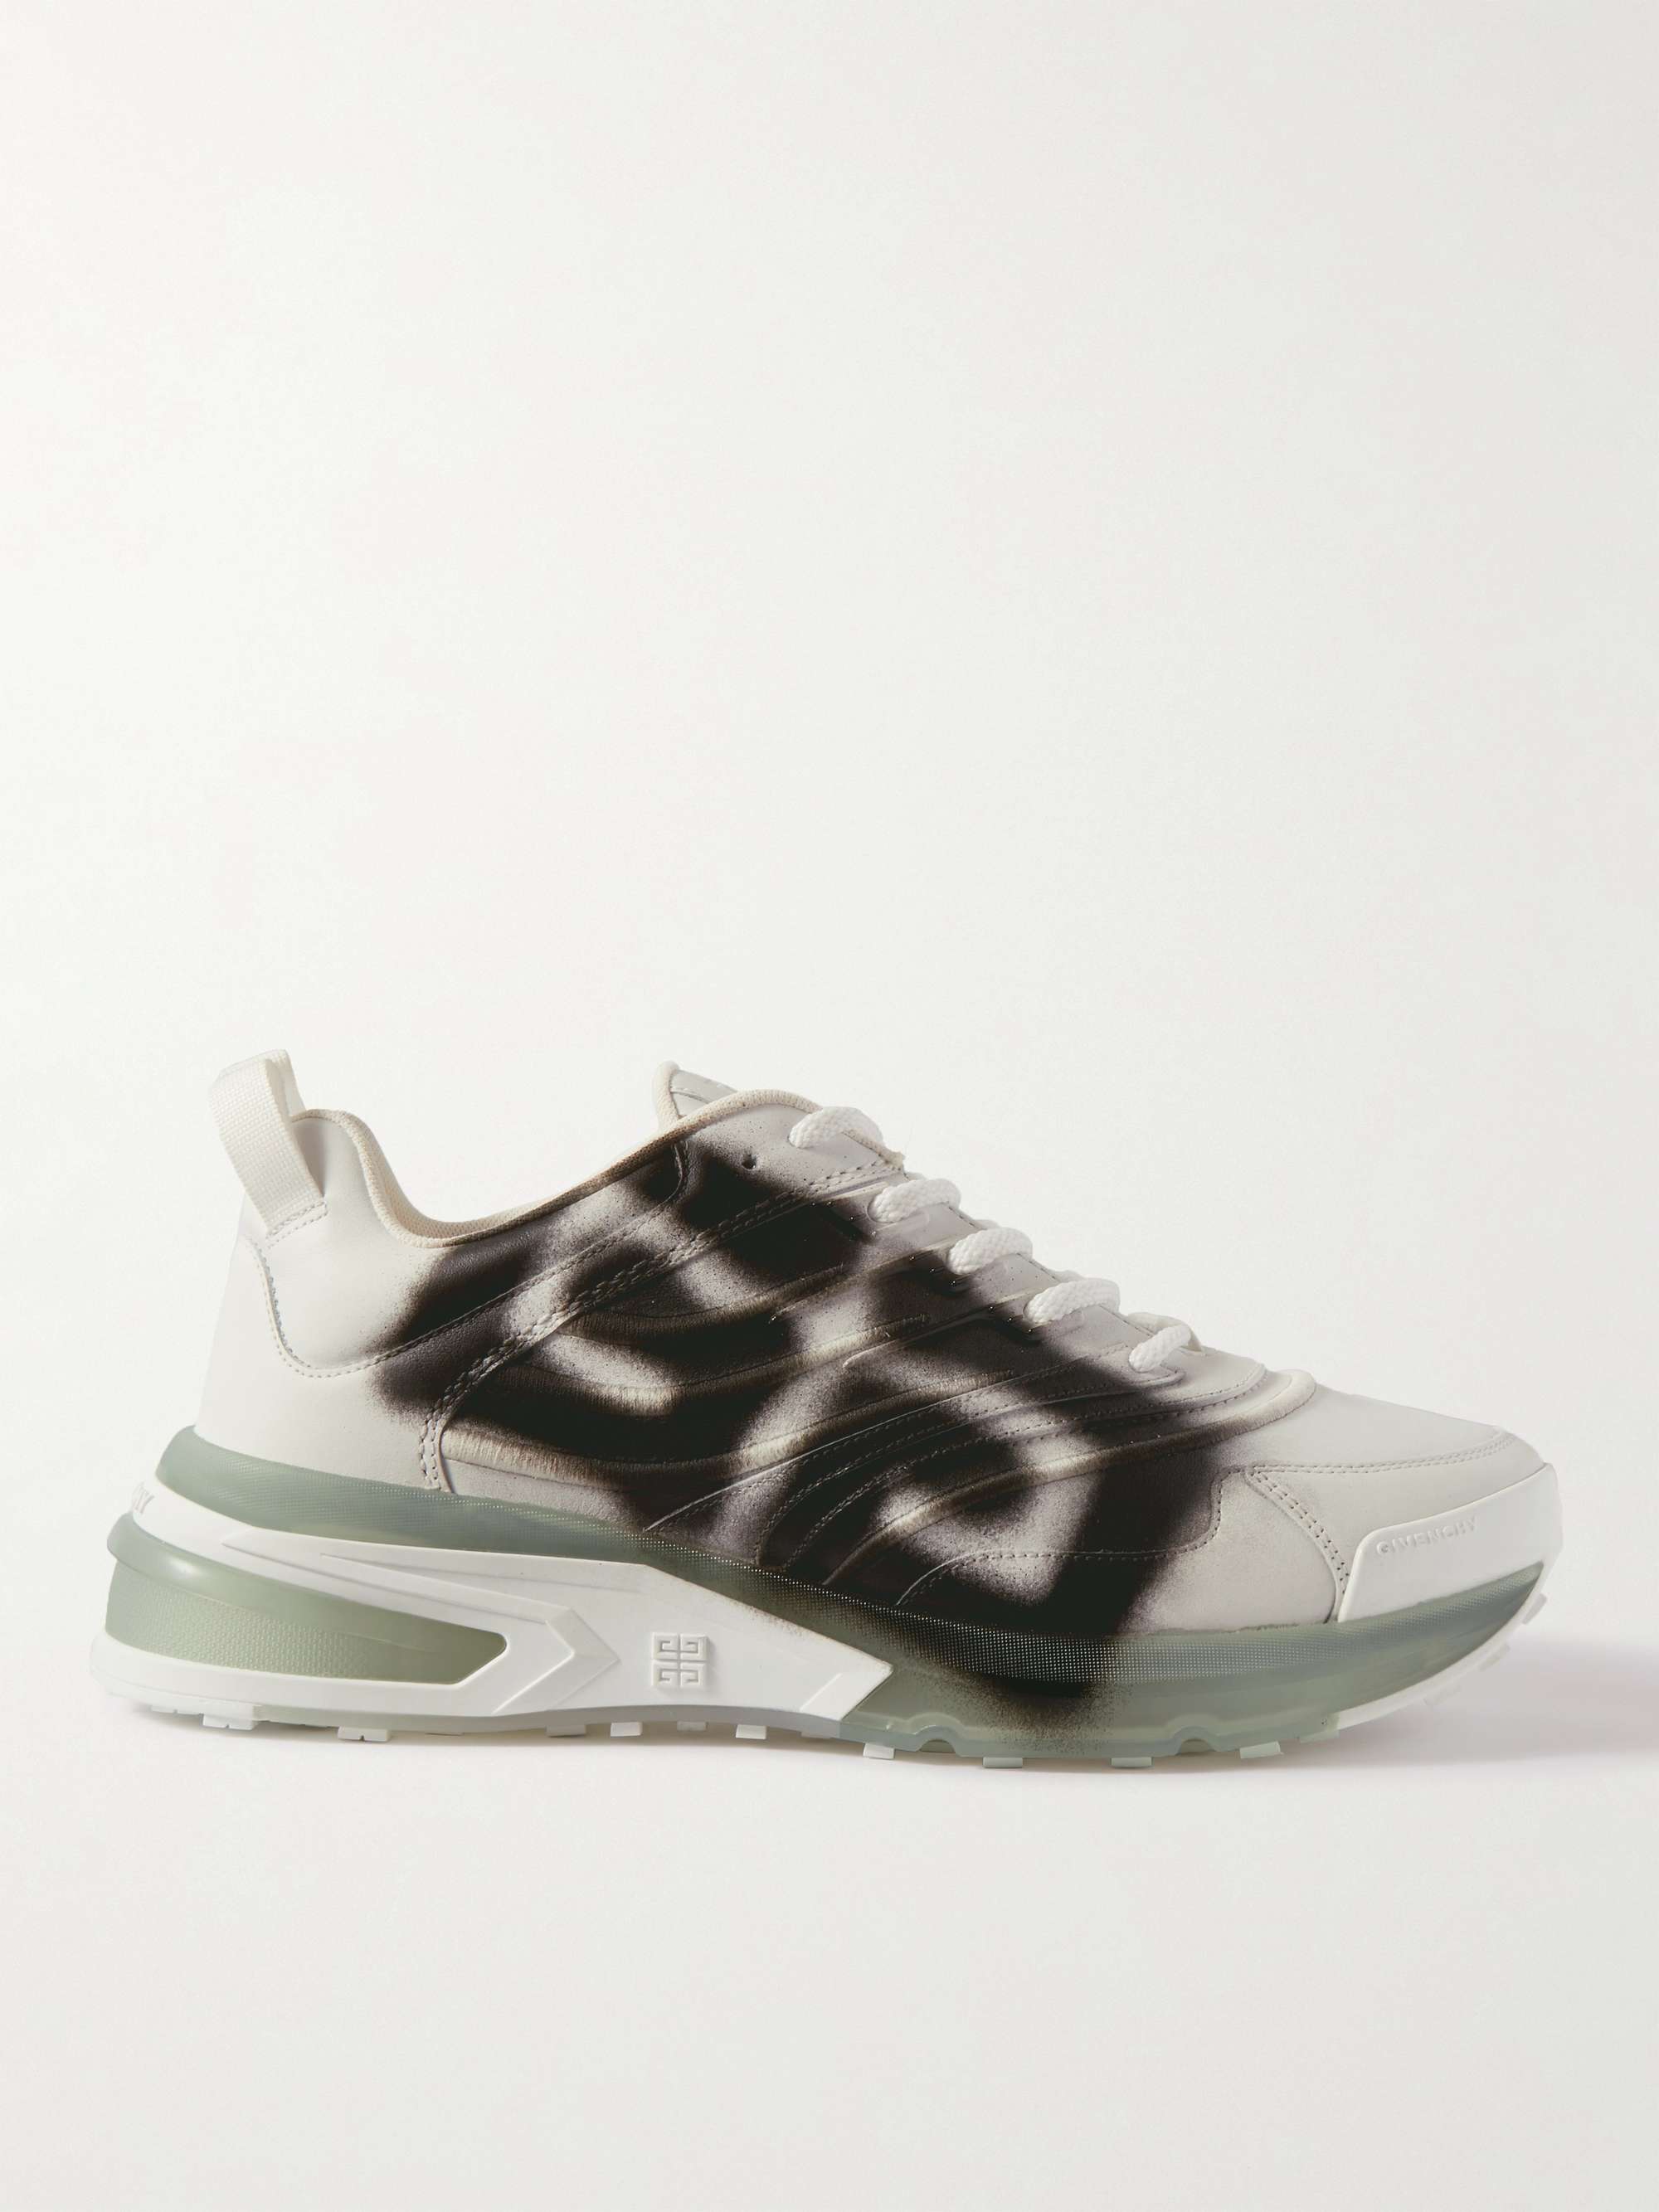 White + Chito City Sport Printed Leather Sneakers | GIVENCHY | MR 